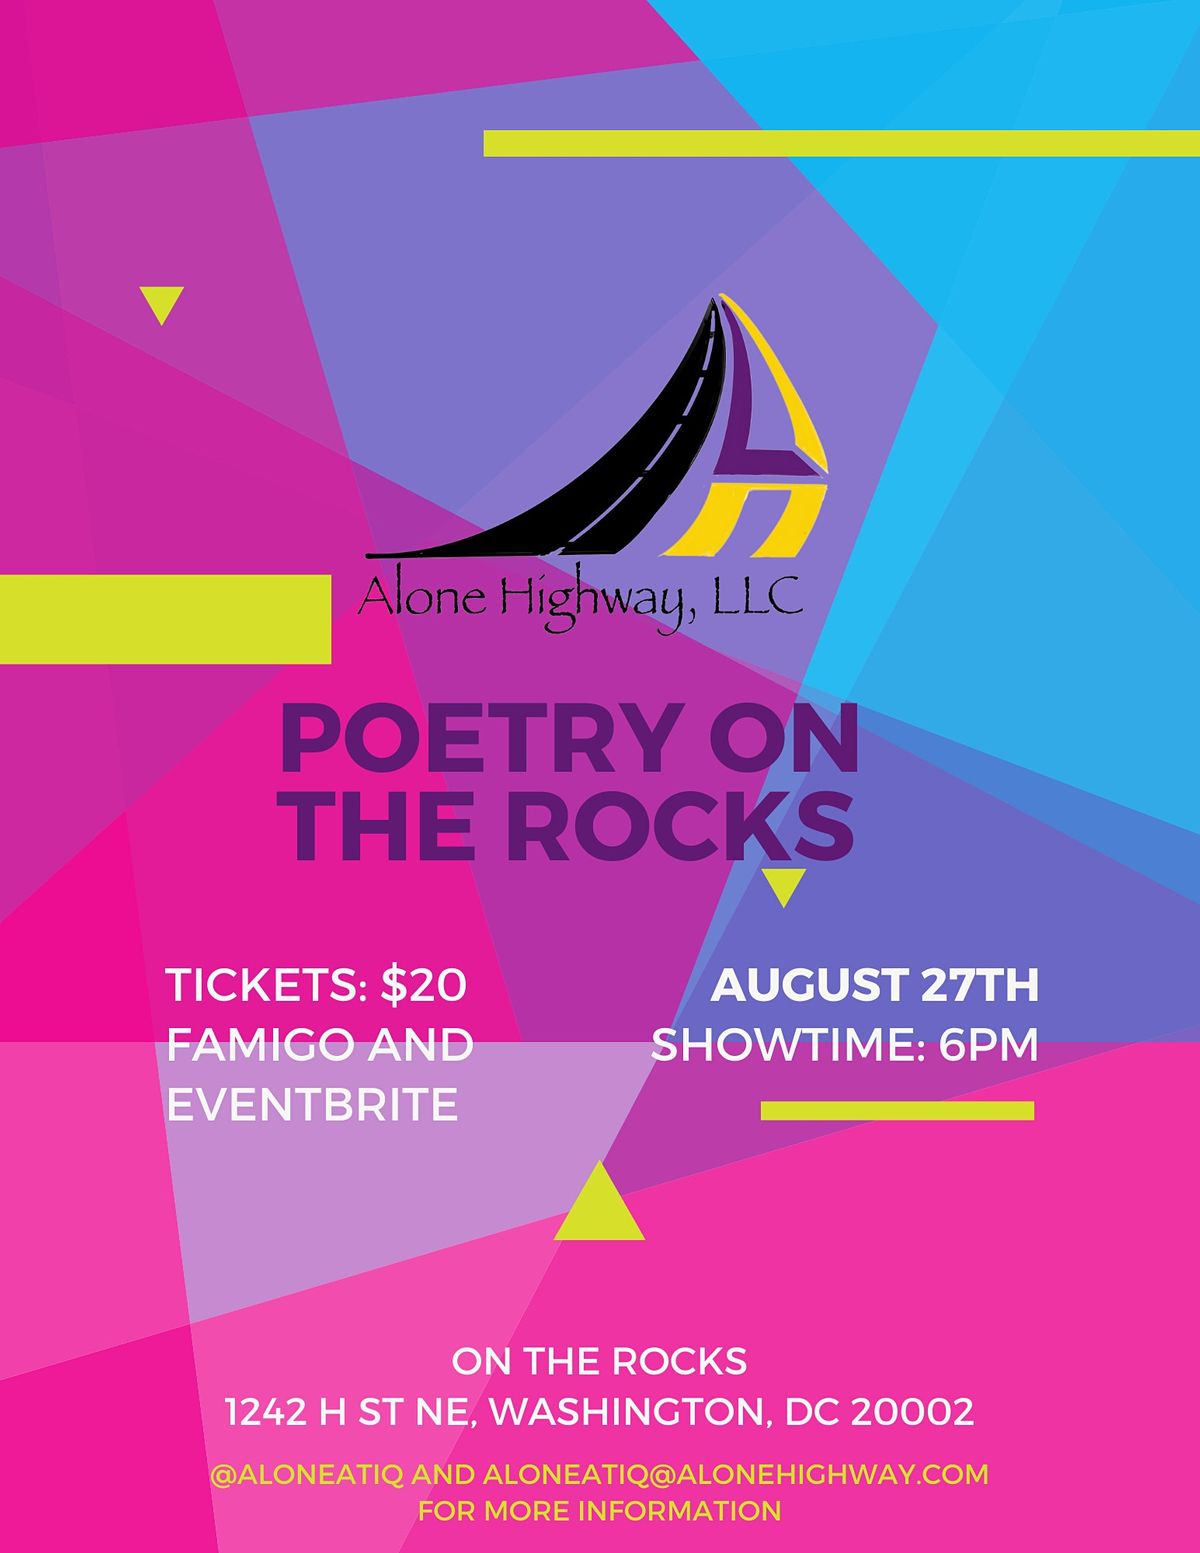 Alone Highway, LLC presents: Poetry On The Rocks